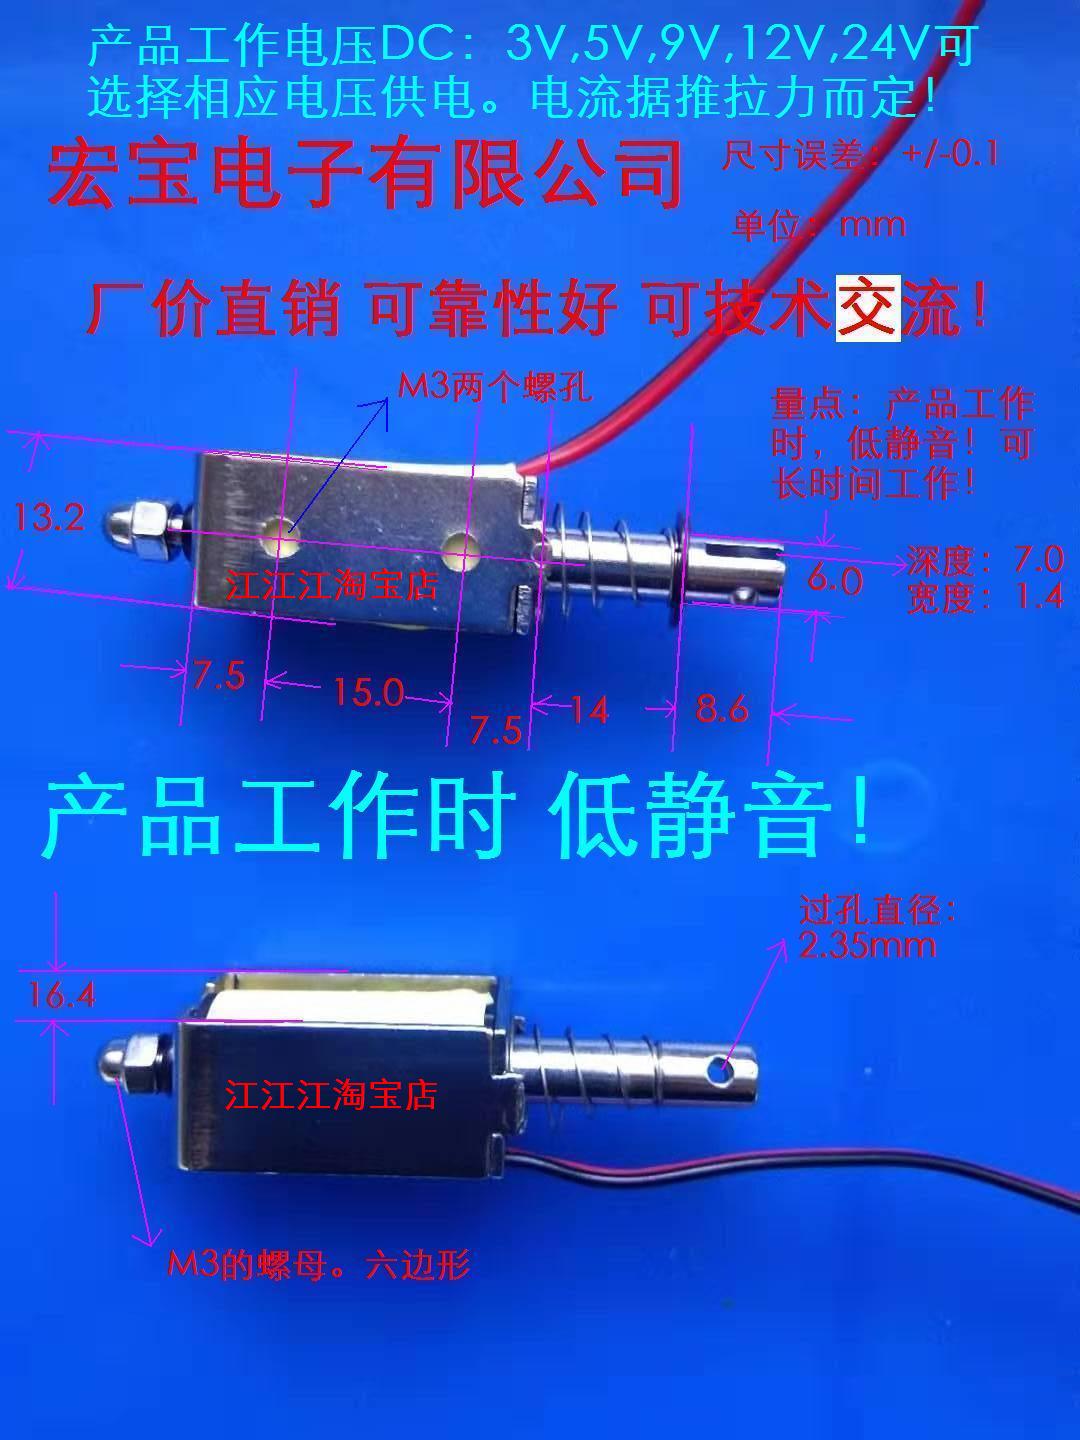 Manufacturer's Direct Sale of Long-term Power-on and Low Noise Penetrating Frame Push-pull Electromagnet in 12VDC Thermal Price